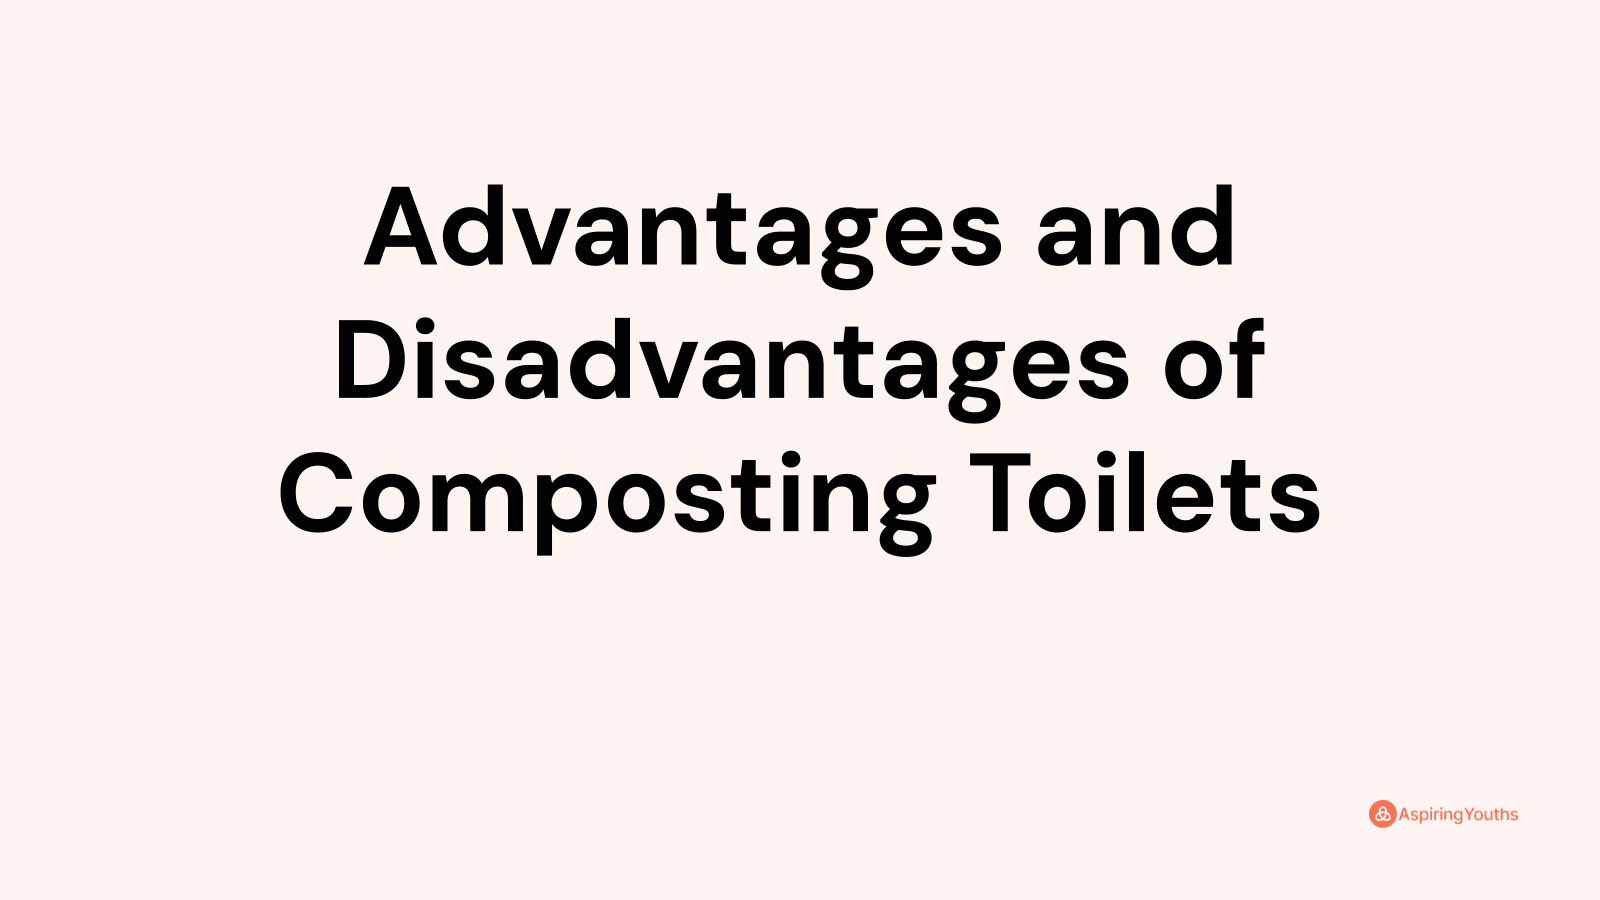 Advantages and disadvantages of Composting Toilets